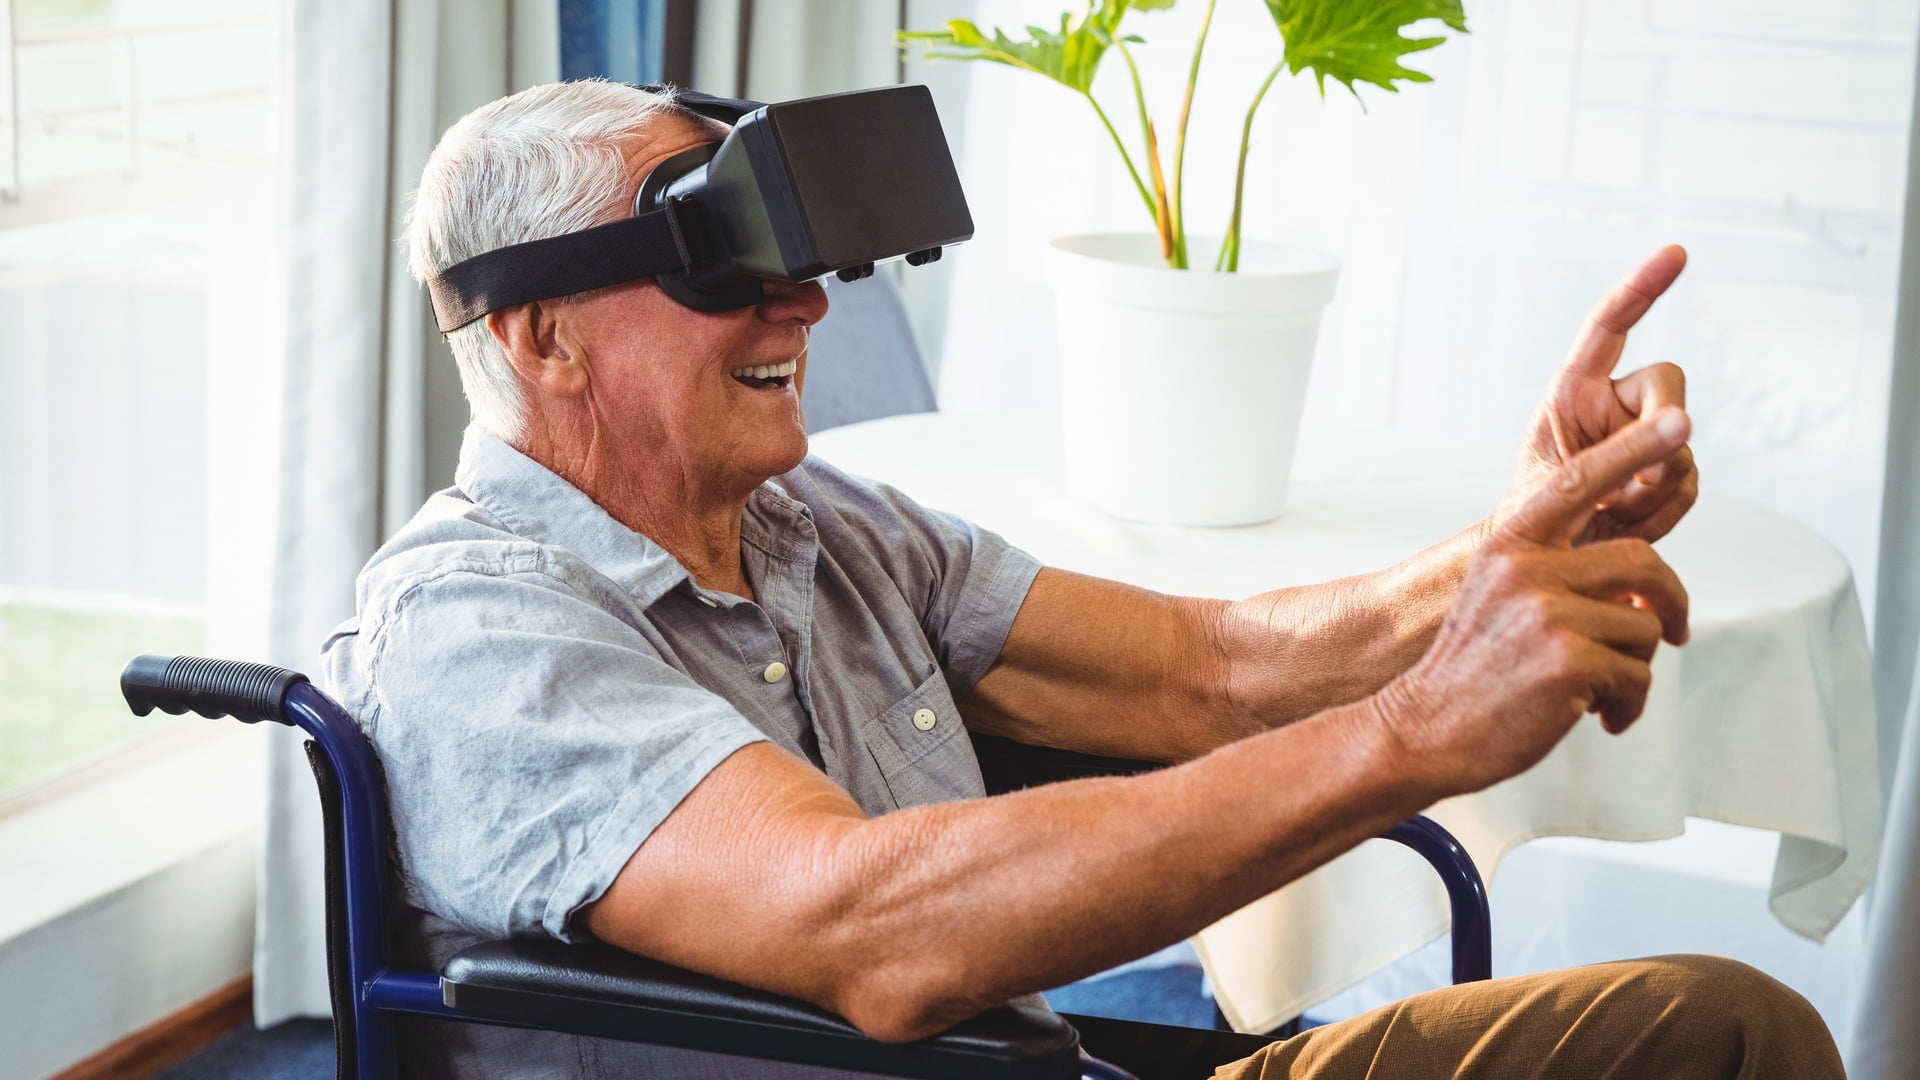 Chronic pain: Can VR help?